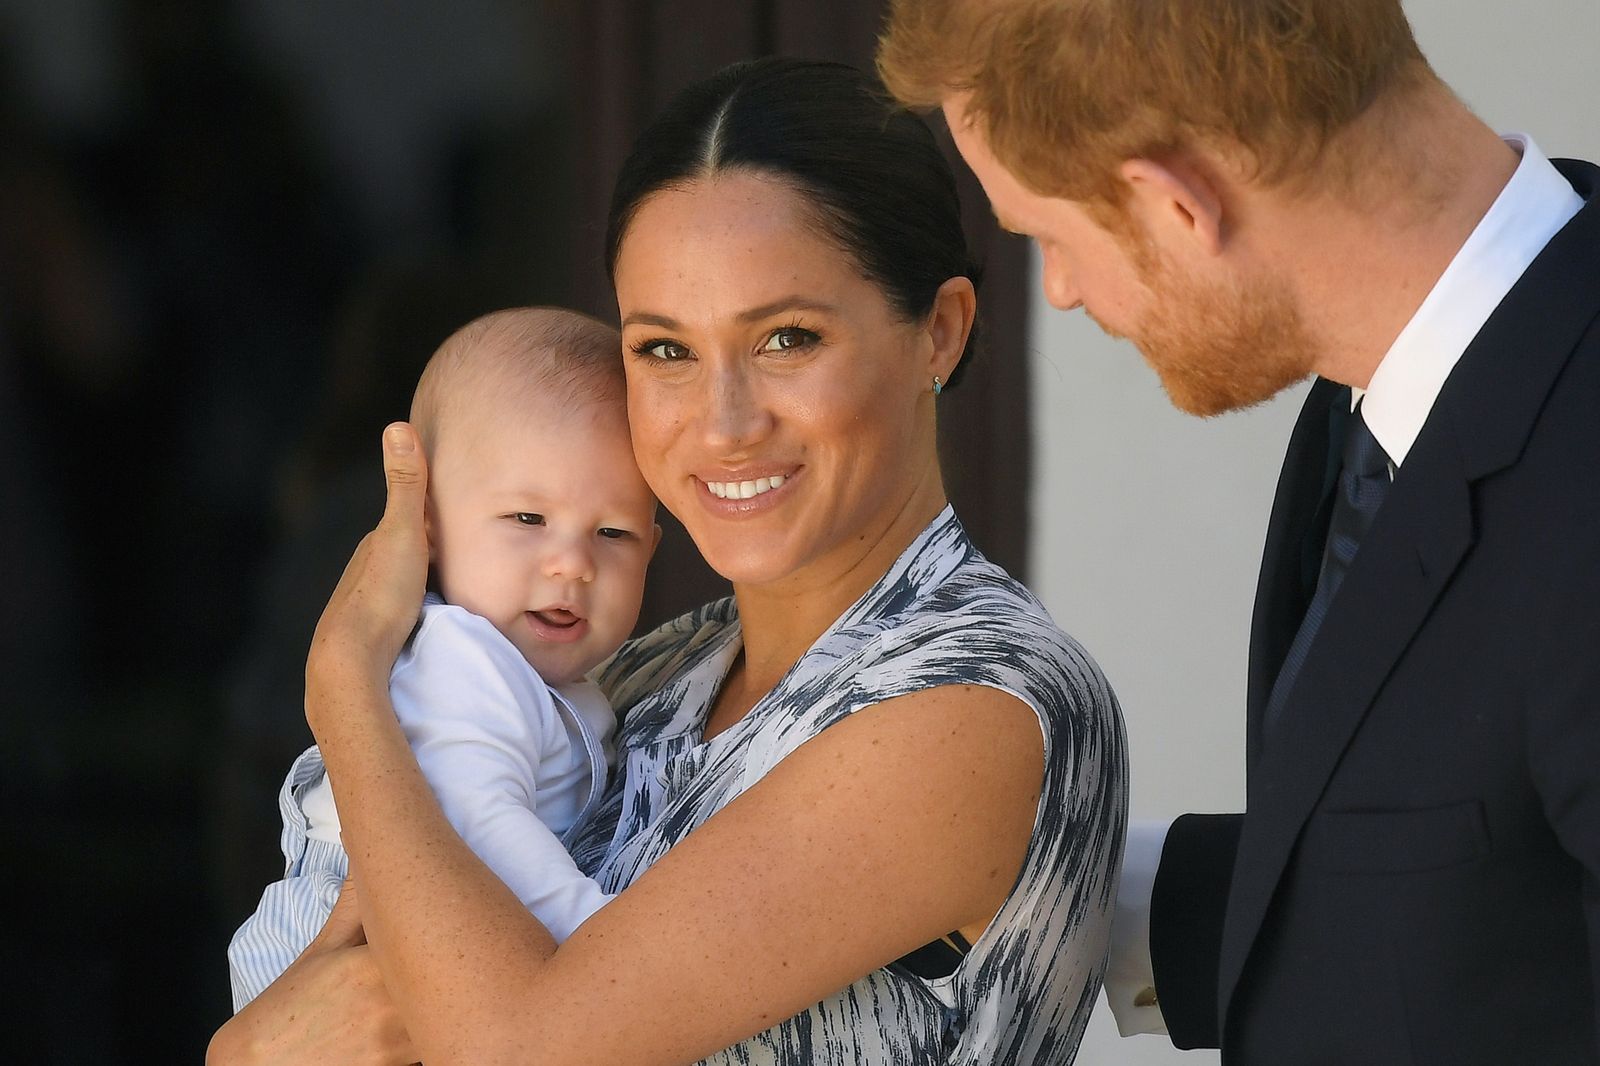 Archie Mountbatten-Windsor, Duchess Meghan, and Prince Harry at a meeting with Archbishop Desmond Tutu during their royal tour of South Africa on September 25, 2019, in Cape Town | Photo: Toby Melville - Pool/Getty Images